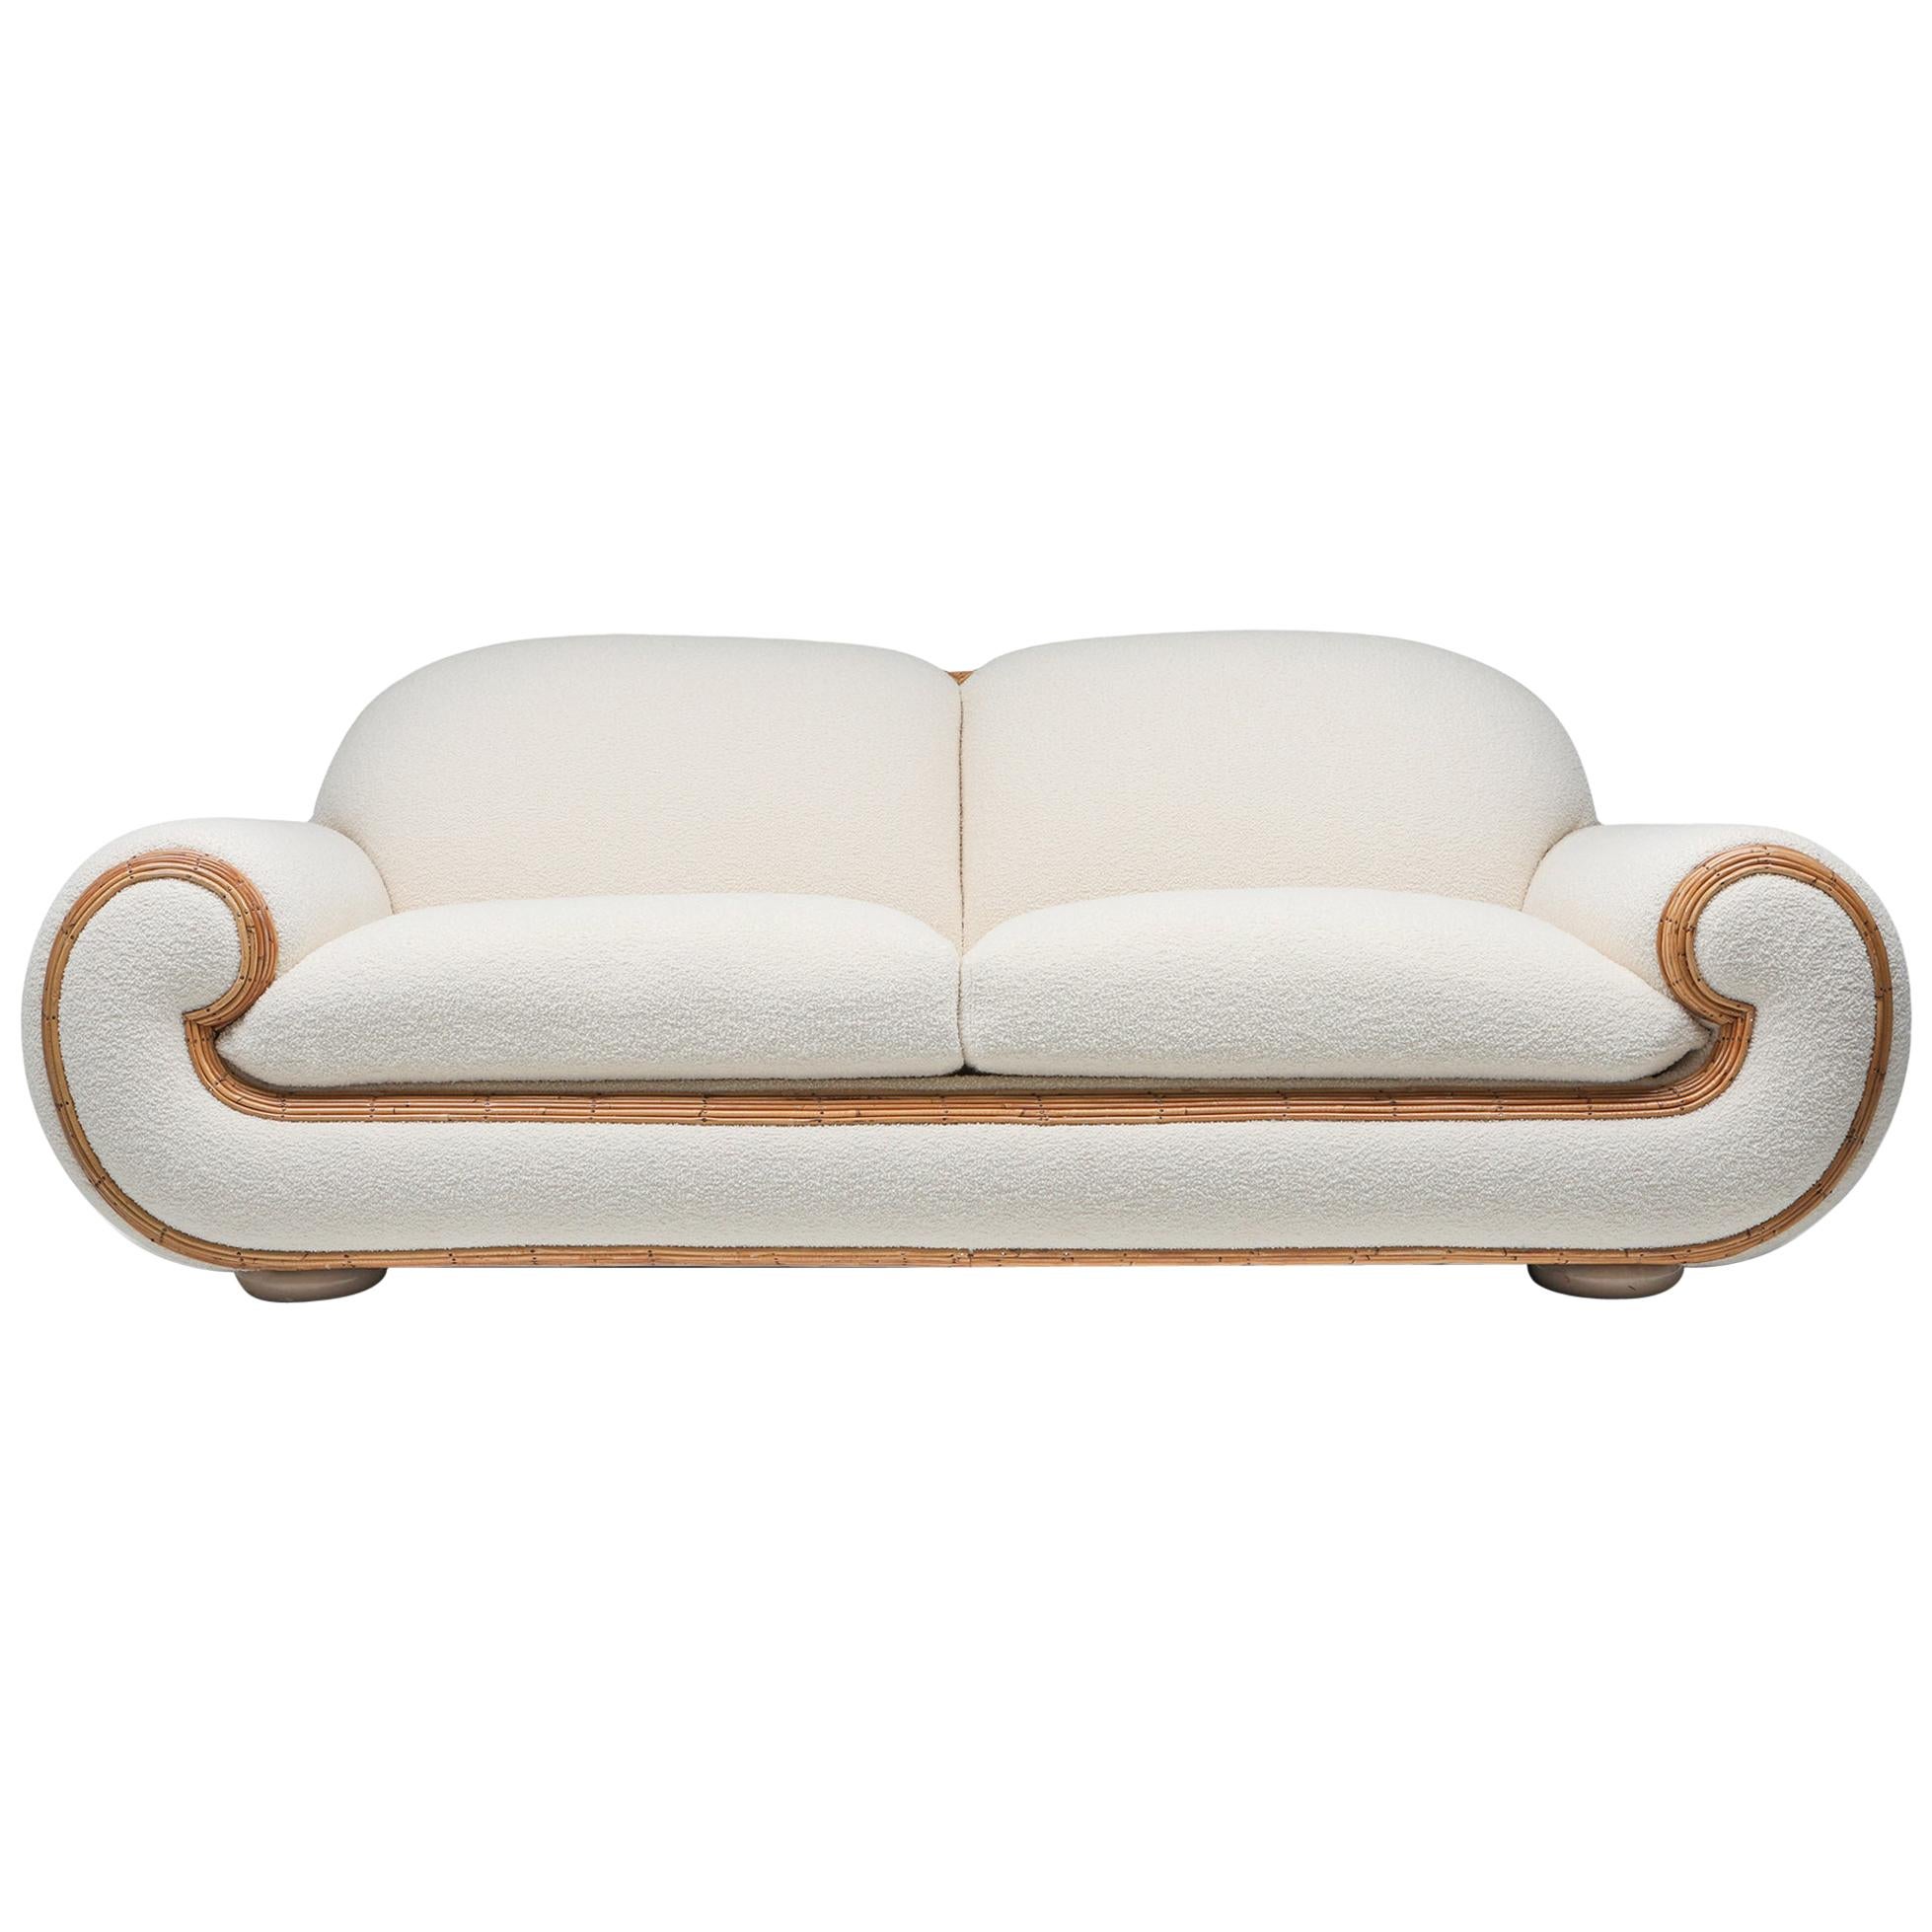 Tropicalist 1970s Italian version of the Ours Polaire sofa by Jean Royère.
Magnificent piece with impressive quality and dimensions.

   

                  